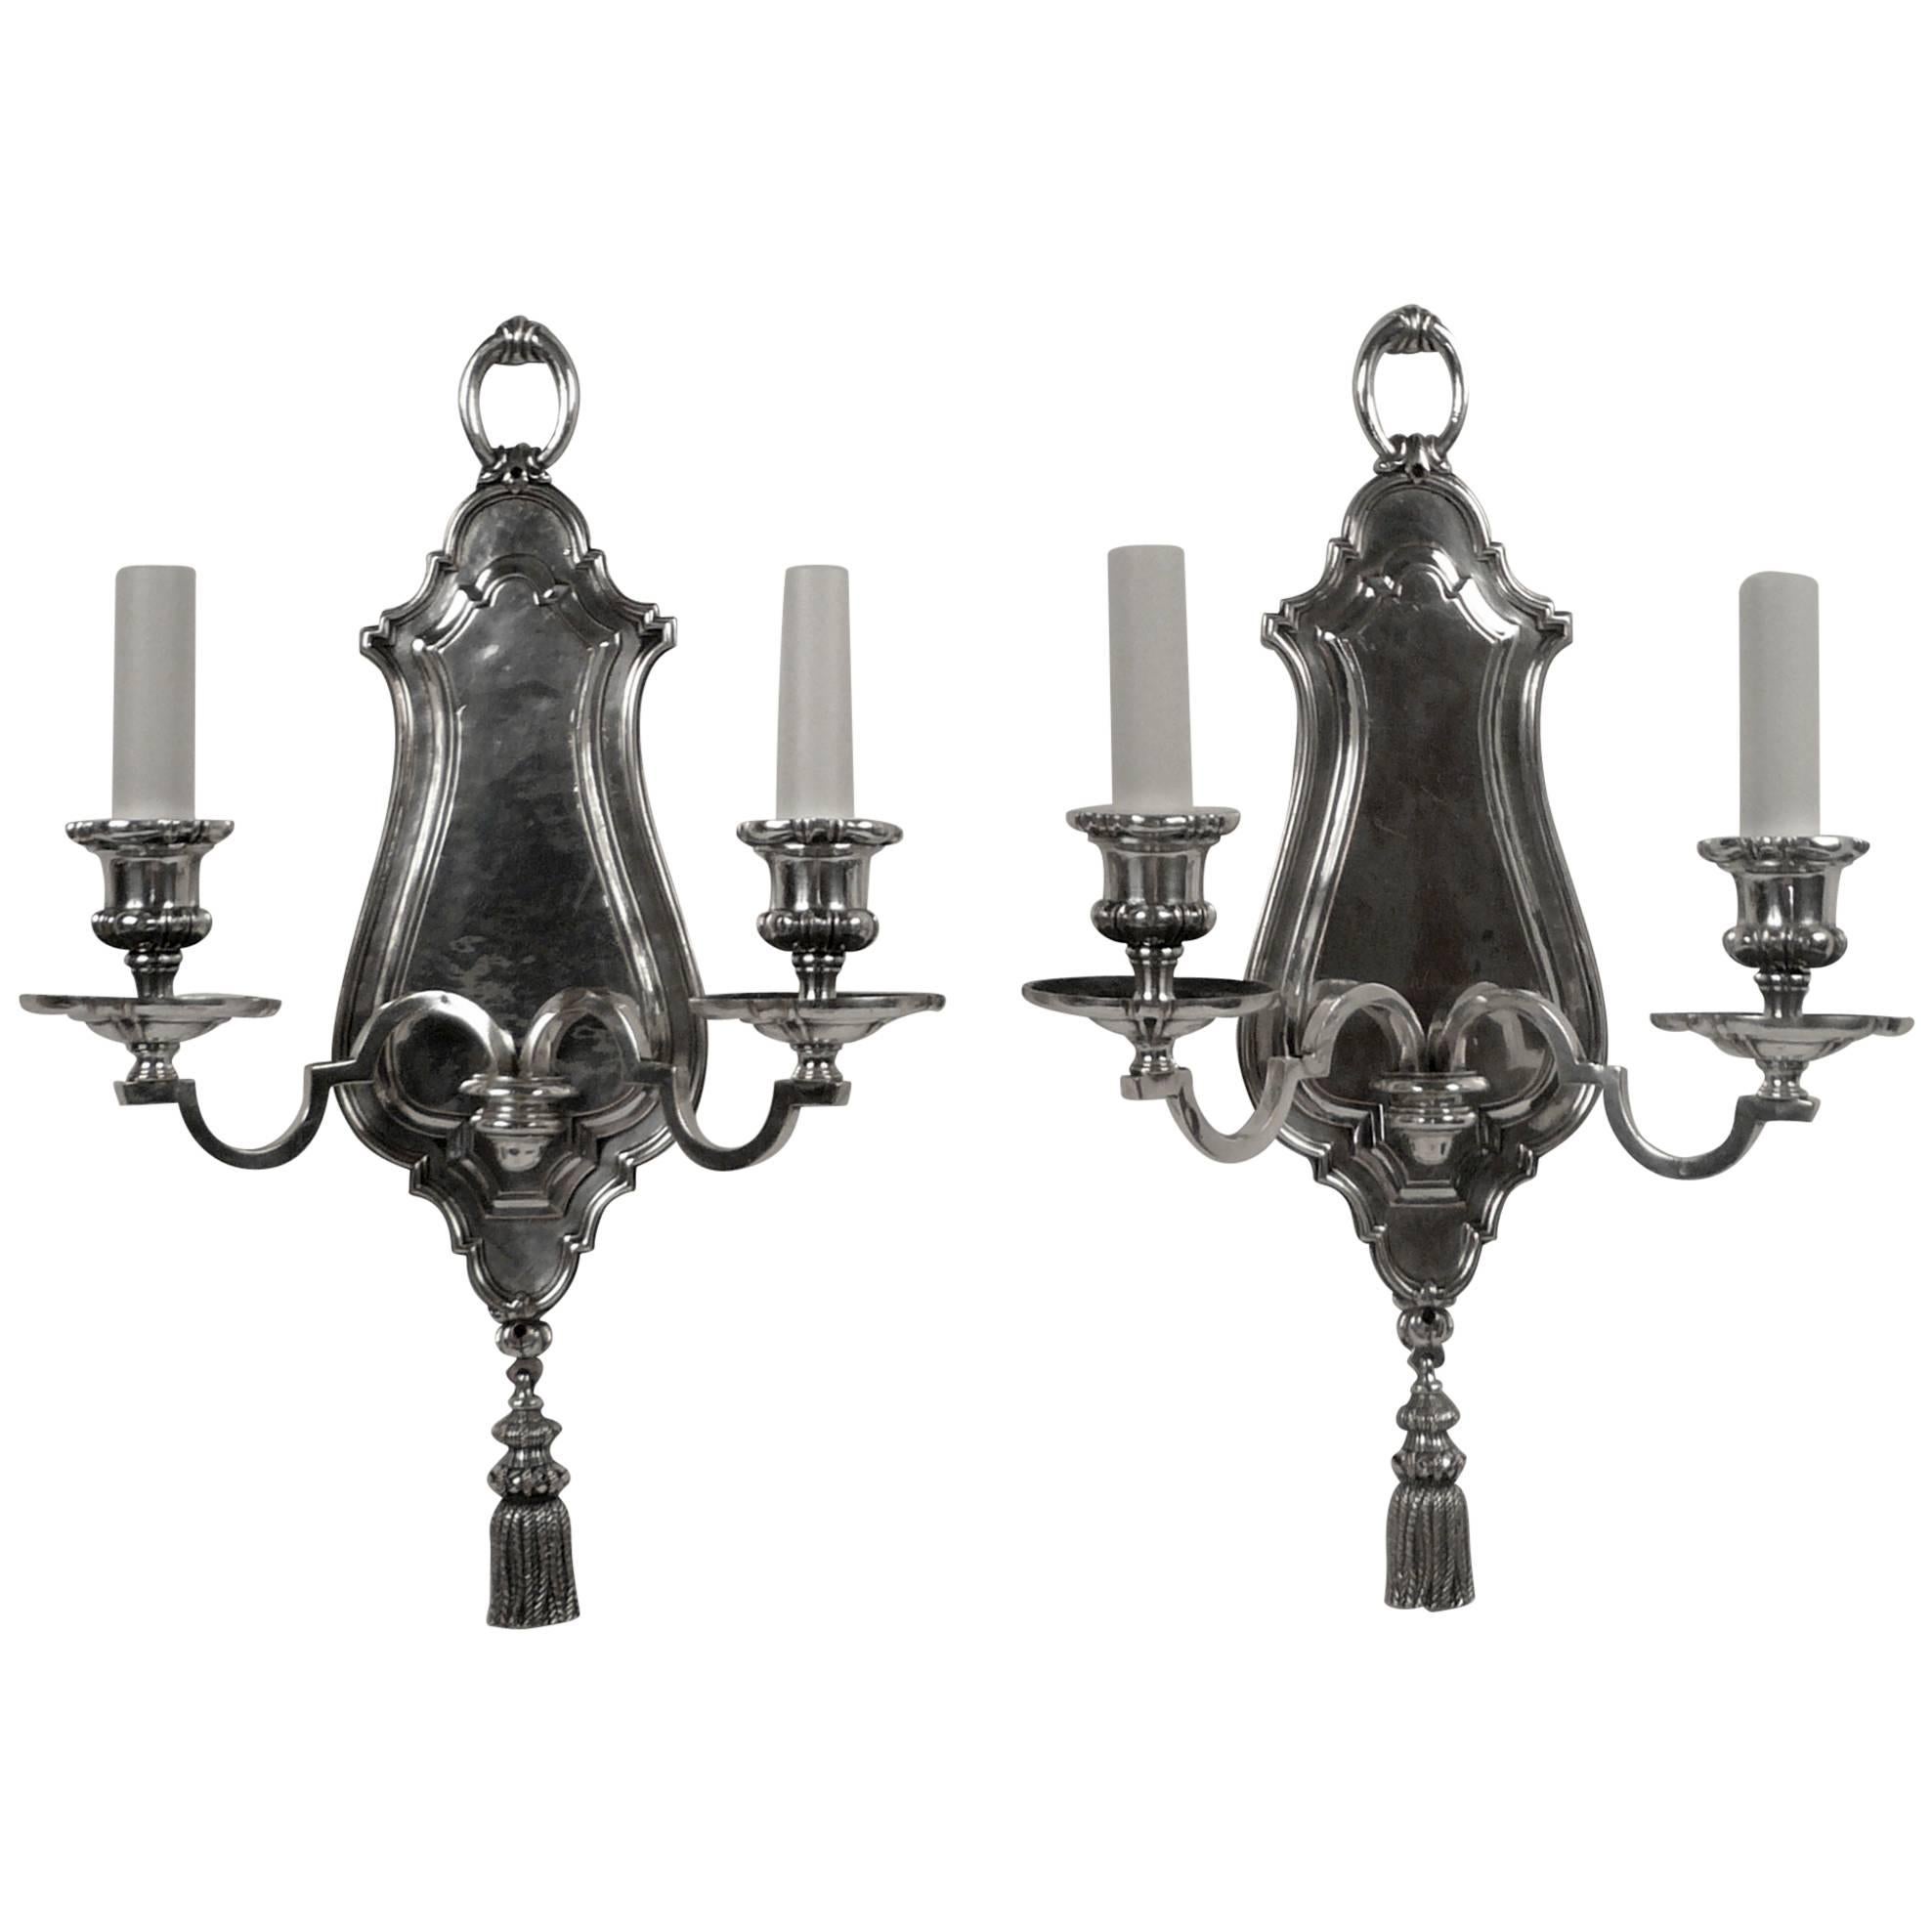 Pair of Early Georgian Style Two-Light Sconces by E. F. Caldwell